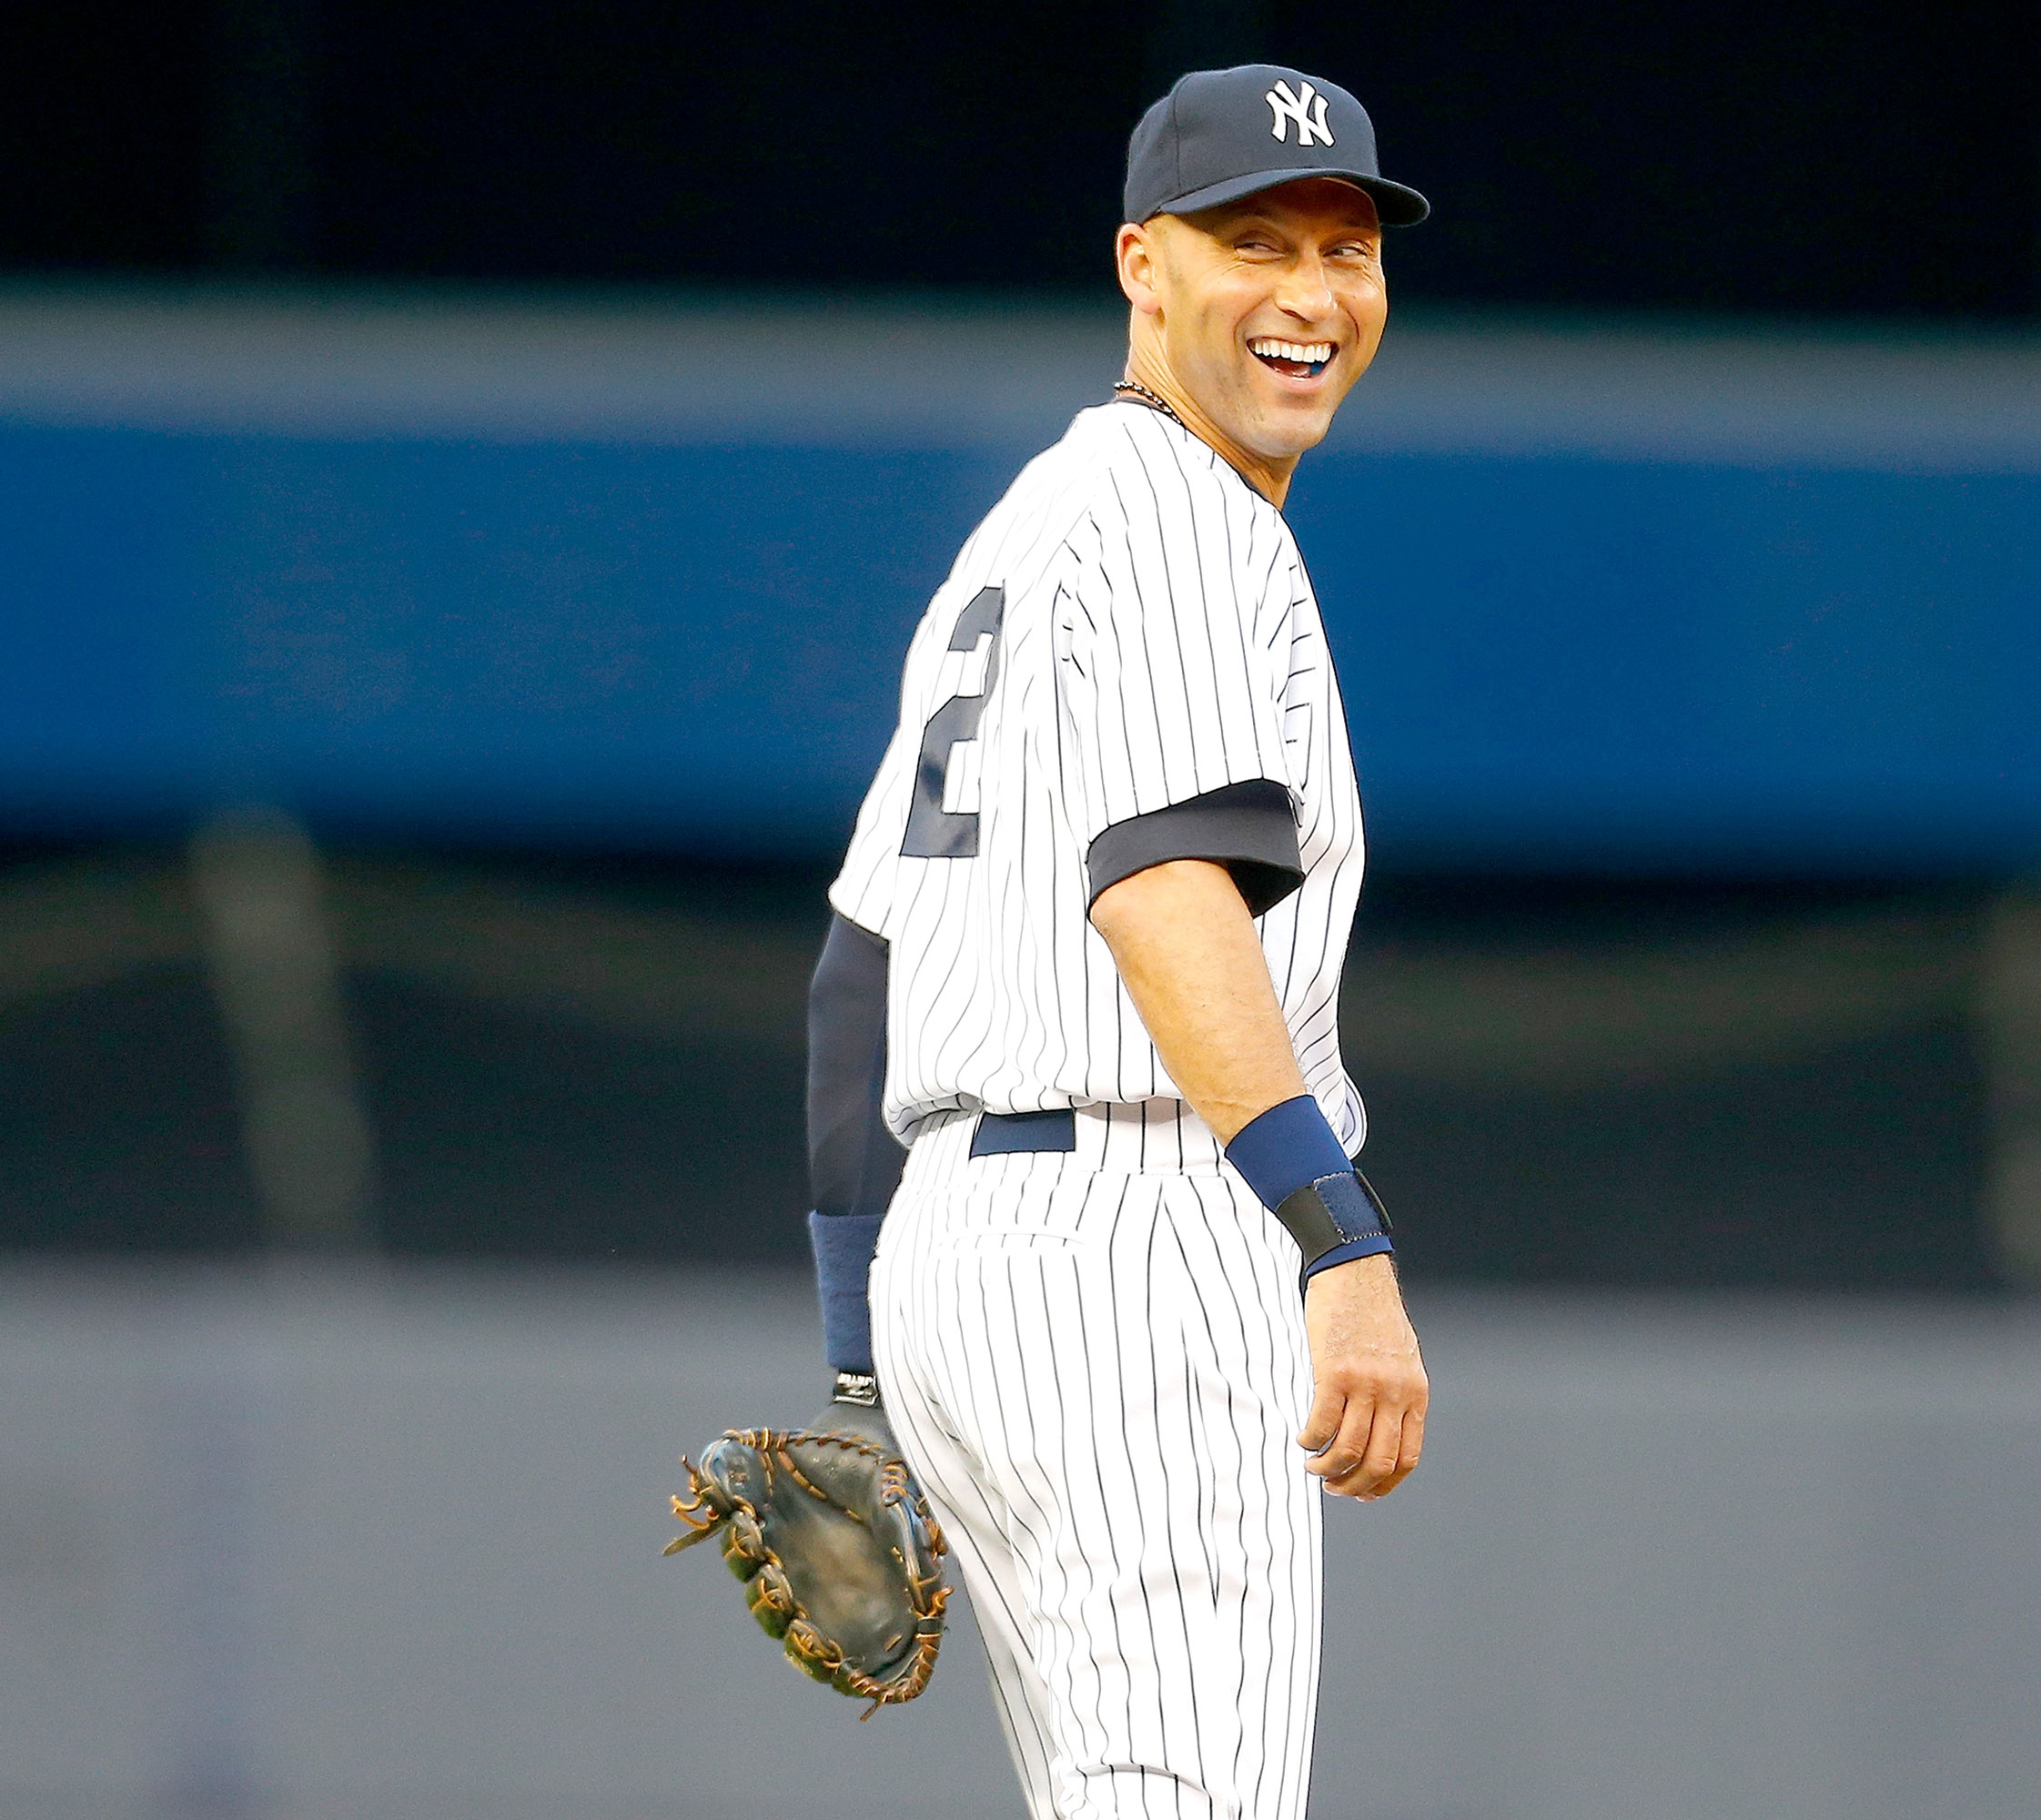 Power of Derek Jeter's No. 2 - MLB's most productive jersey numbers